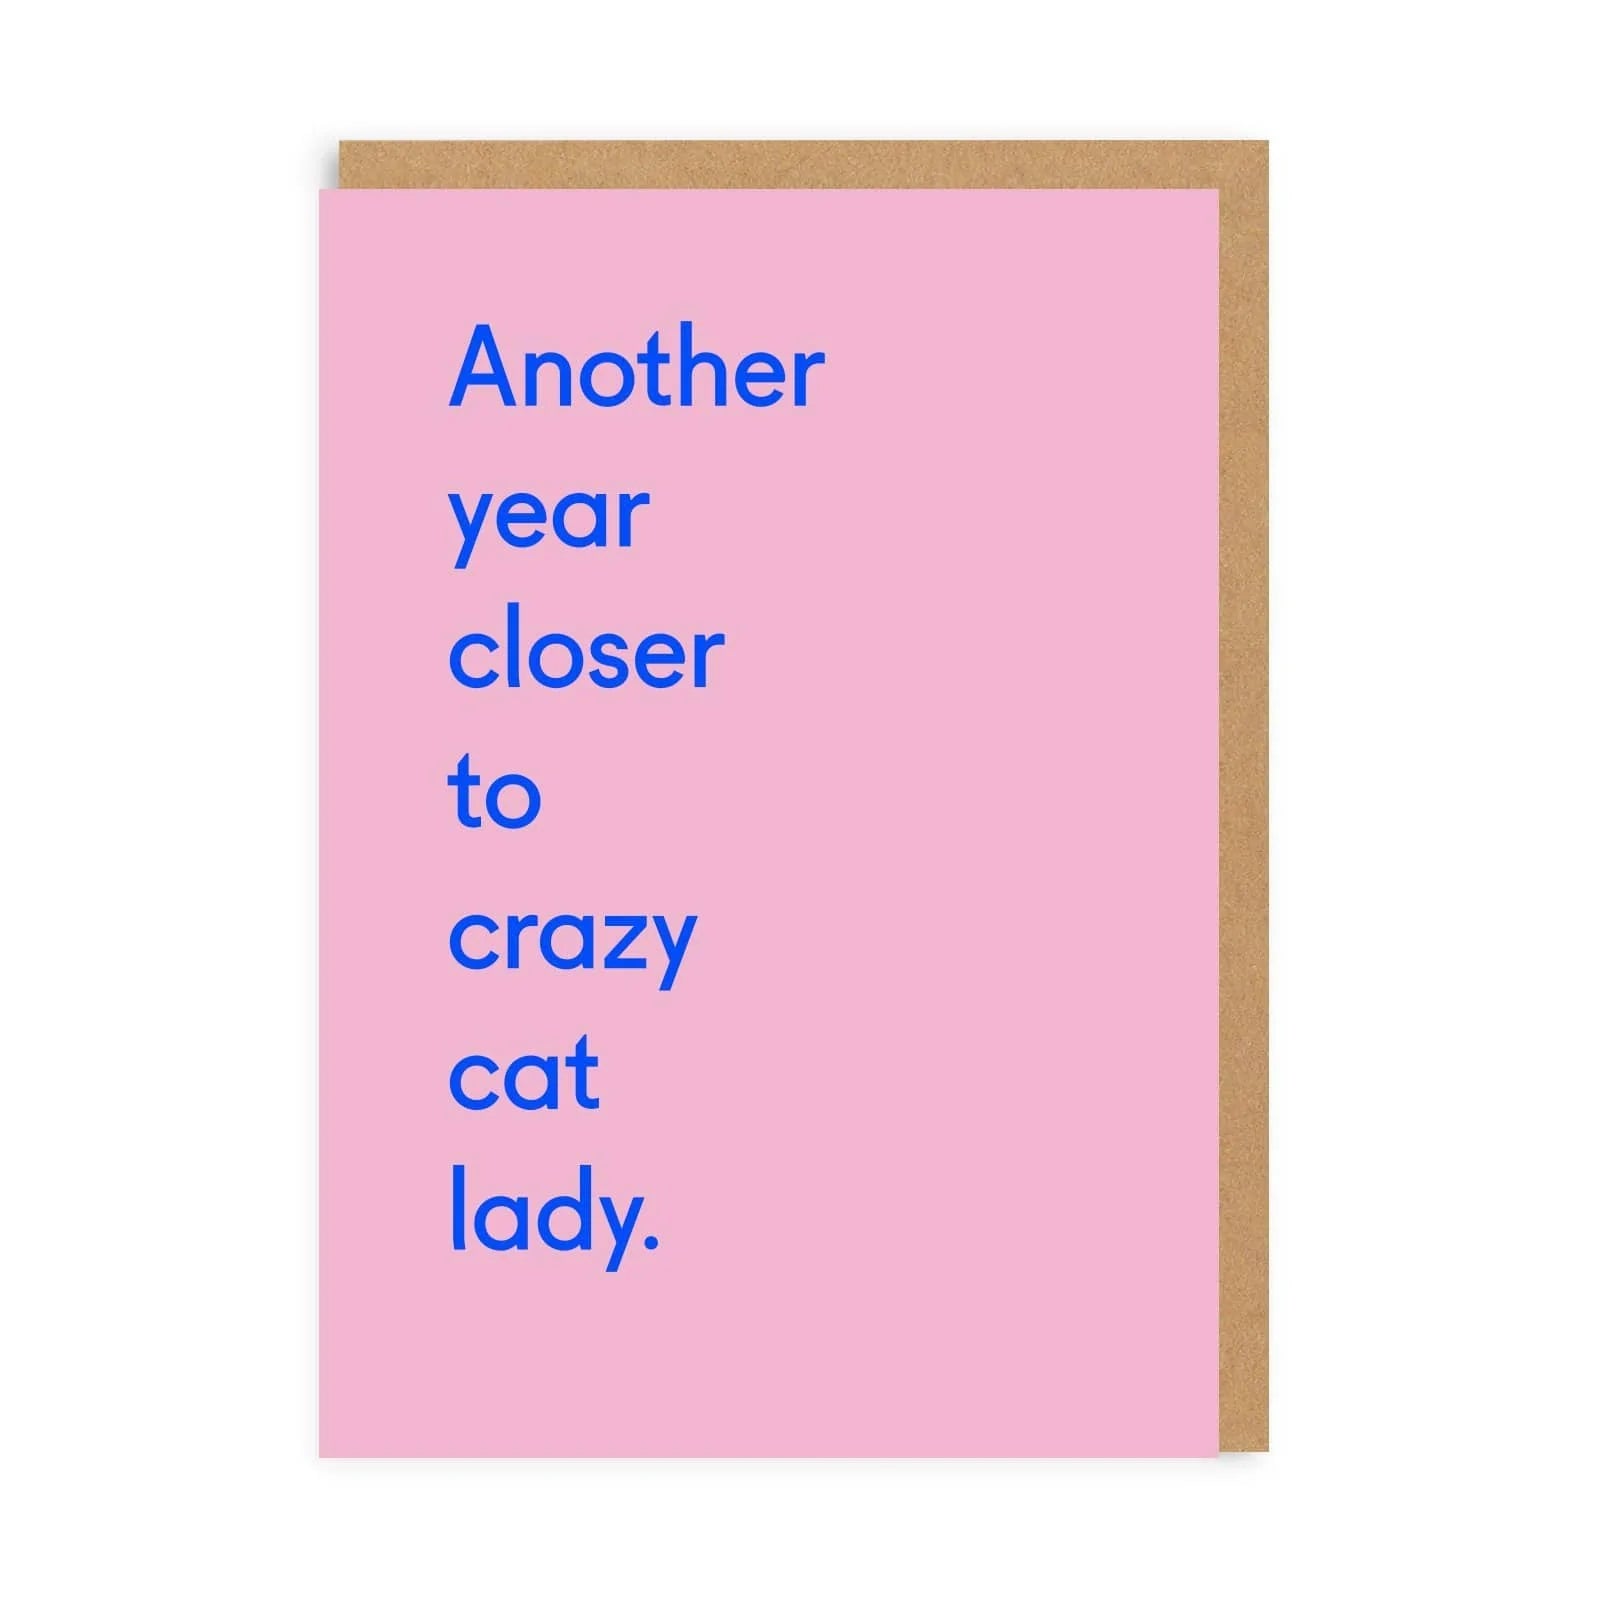 ANOTHER YEAR CLOSER TO CRAZY CAT LADY | CARD BY OHH DEER